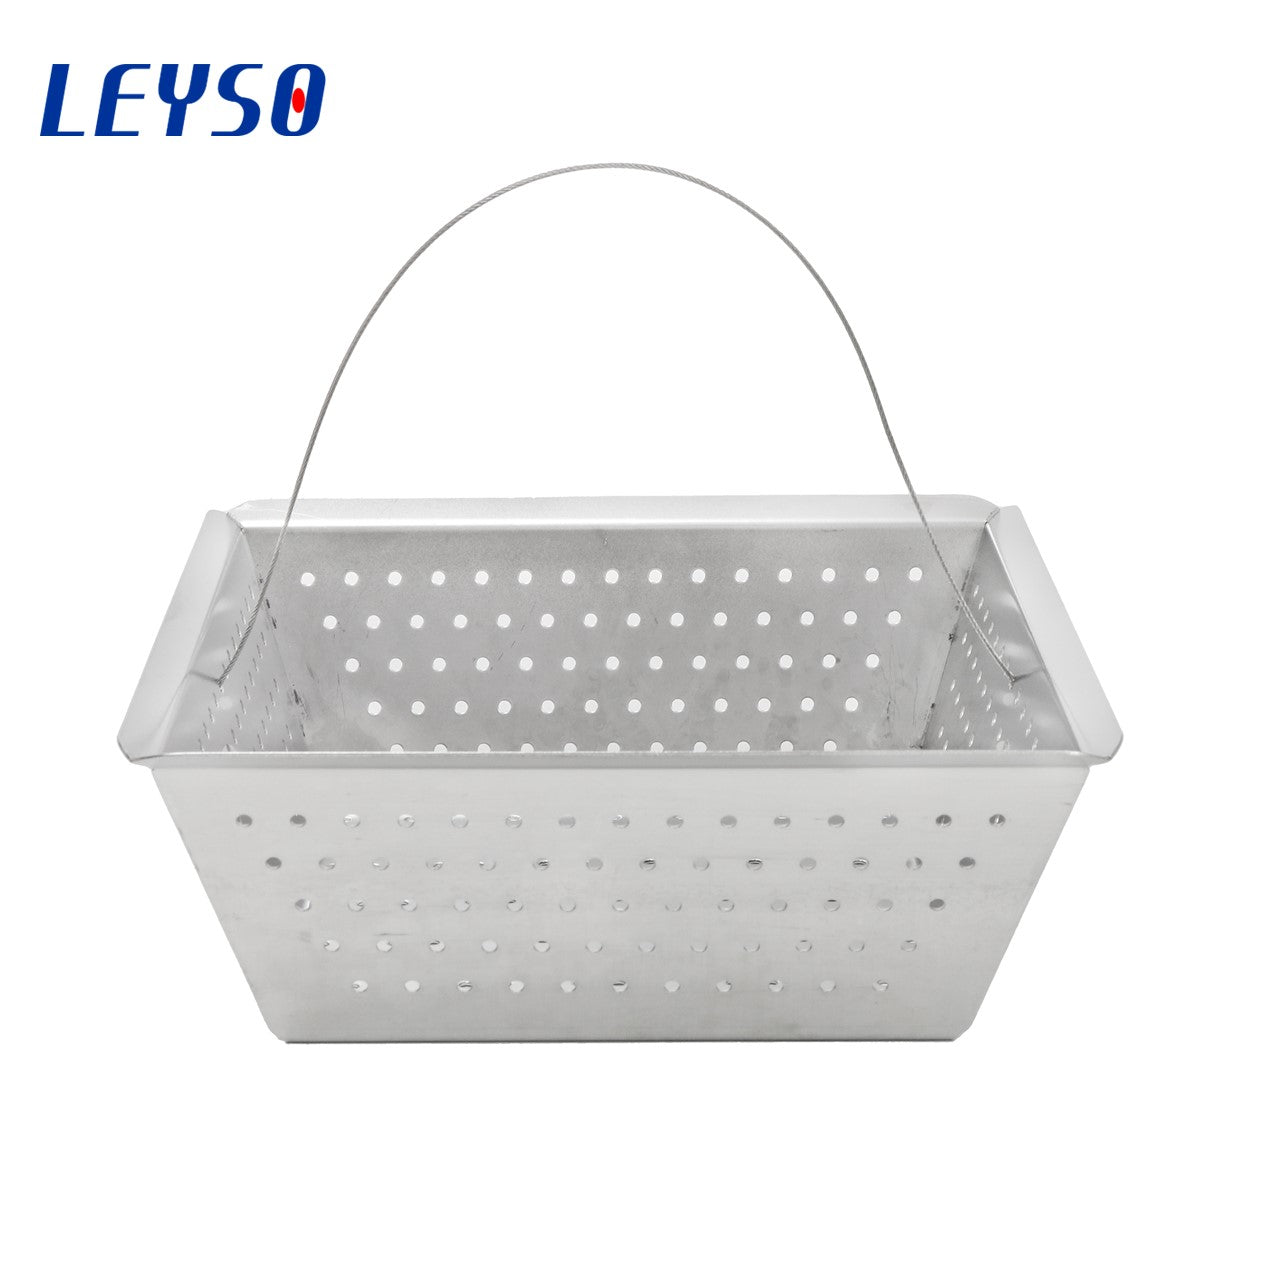 Stainless Steel Thick Drain Basket, Vegetable Washing Basket With